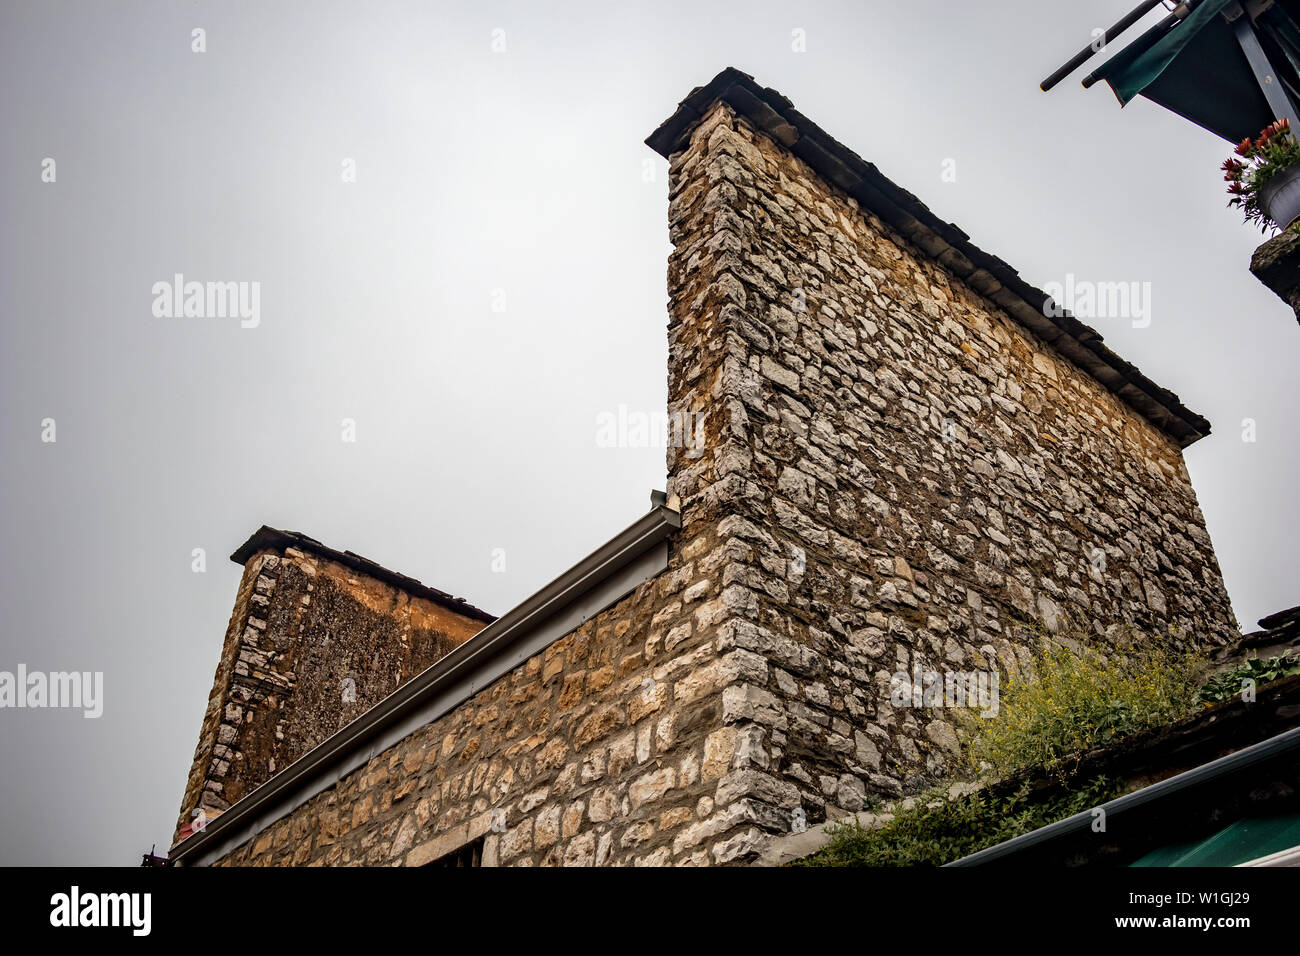 Strange roof with two side stone walls of old Greek residential building, Ioannina downtown, Greece. Moody foggy spring morning, no people Stock Photo